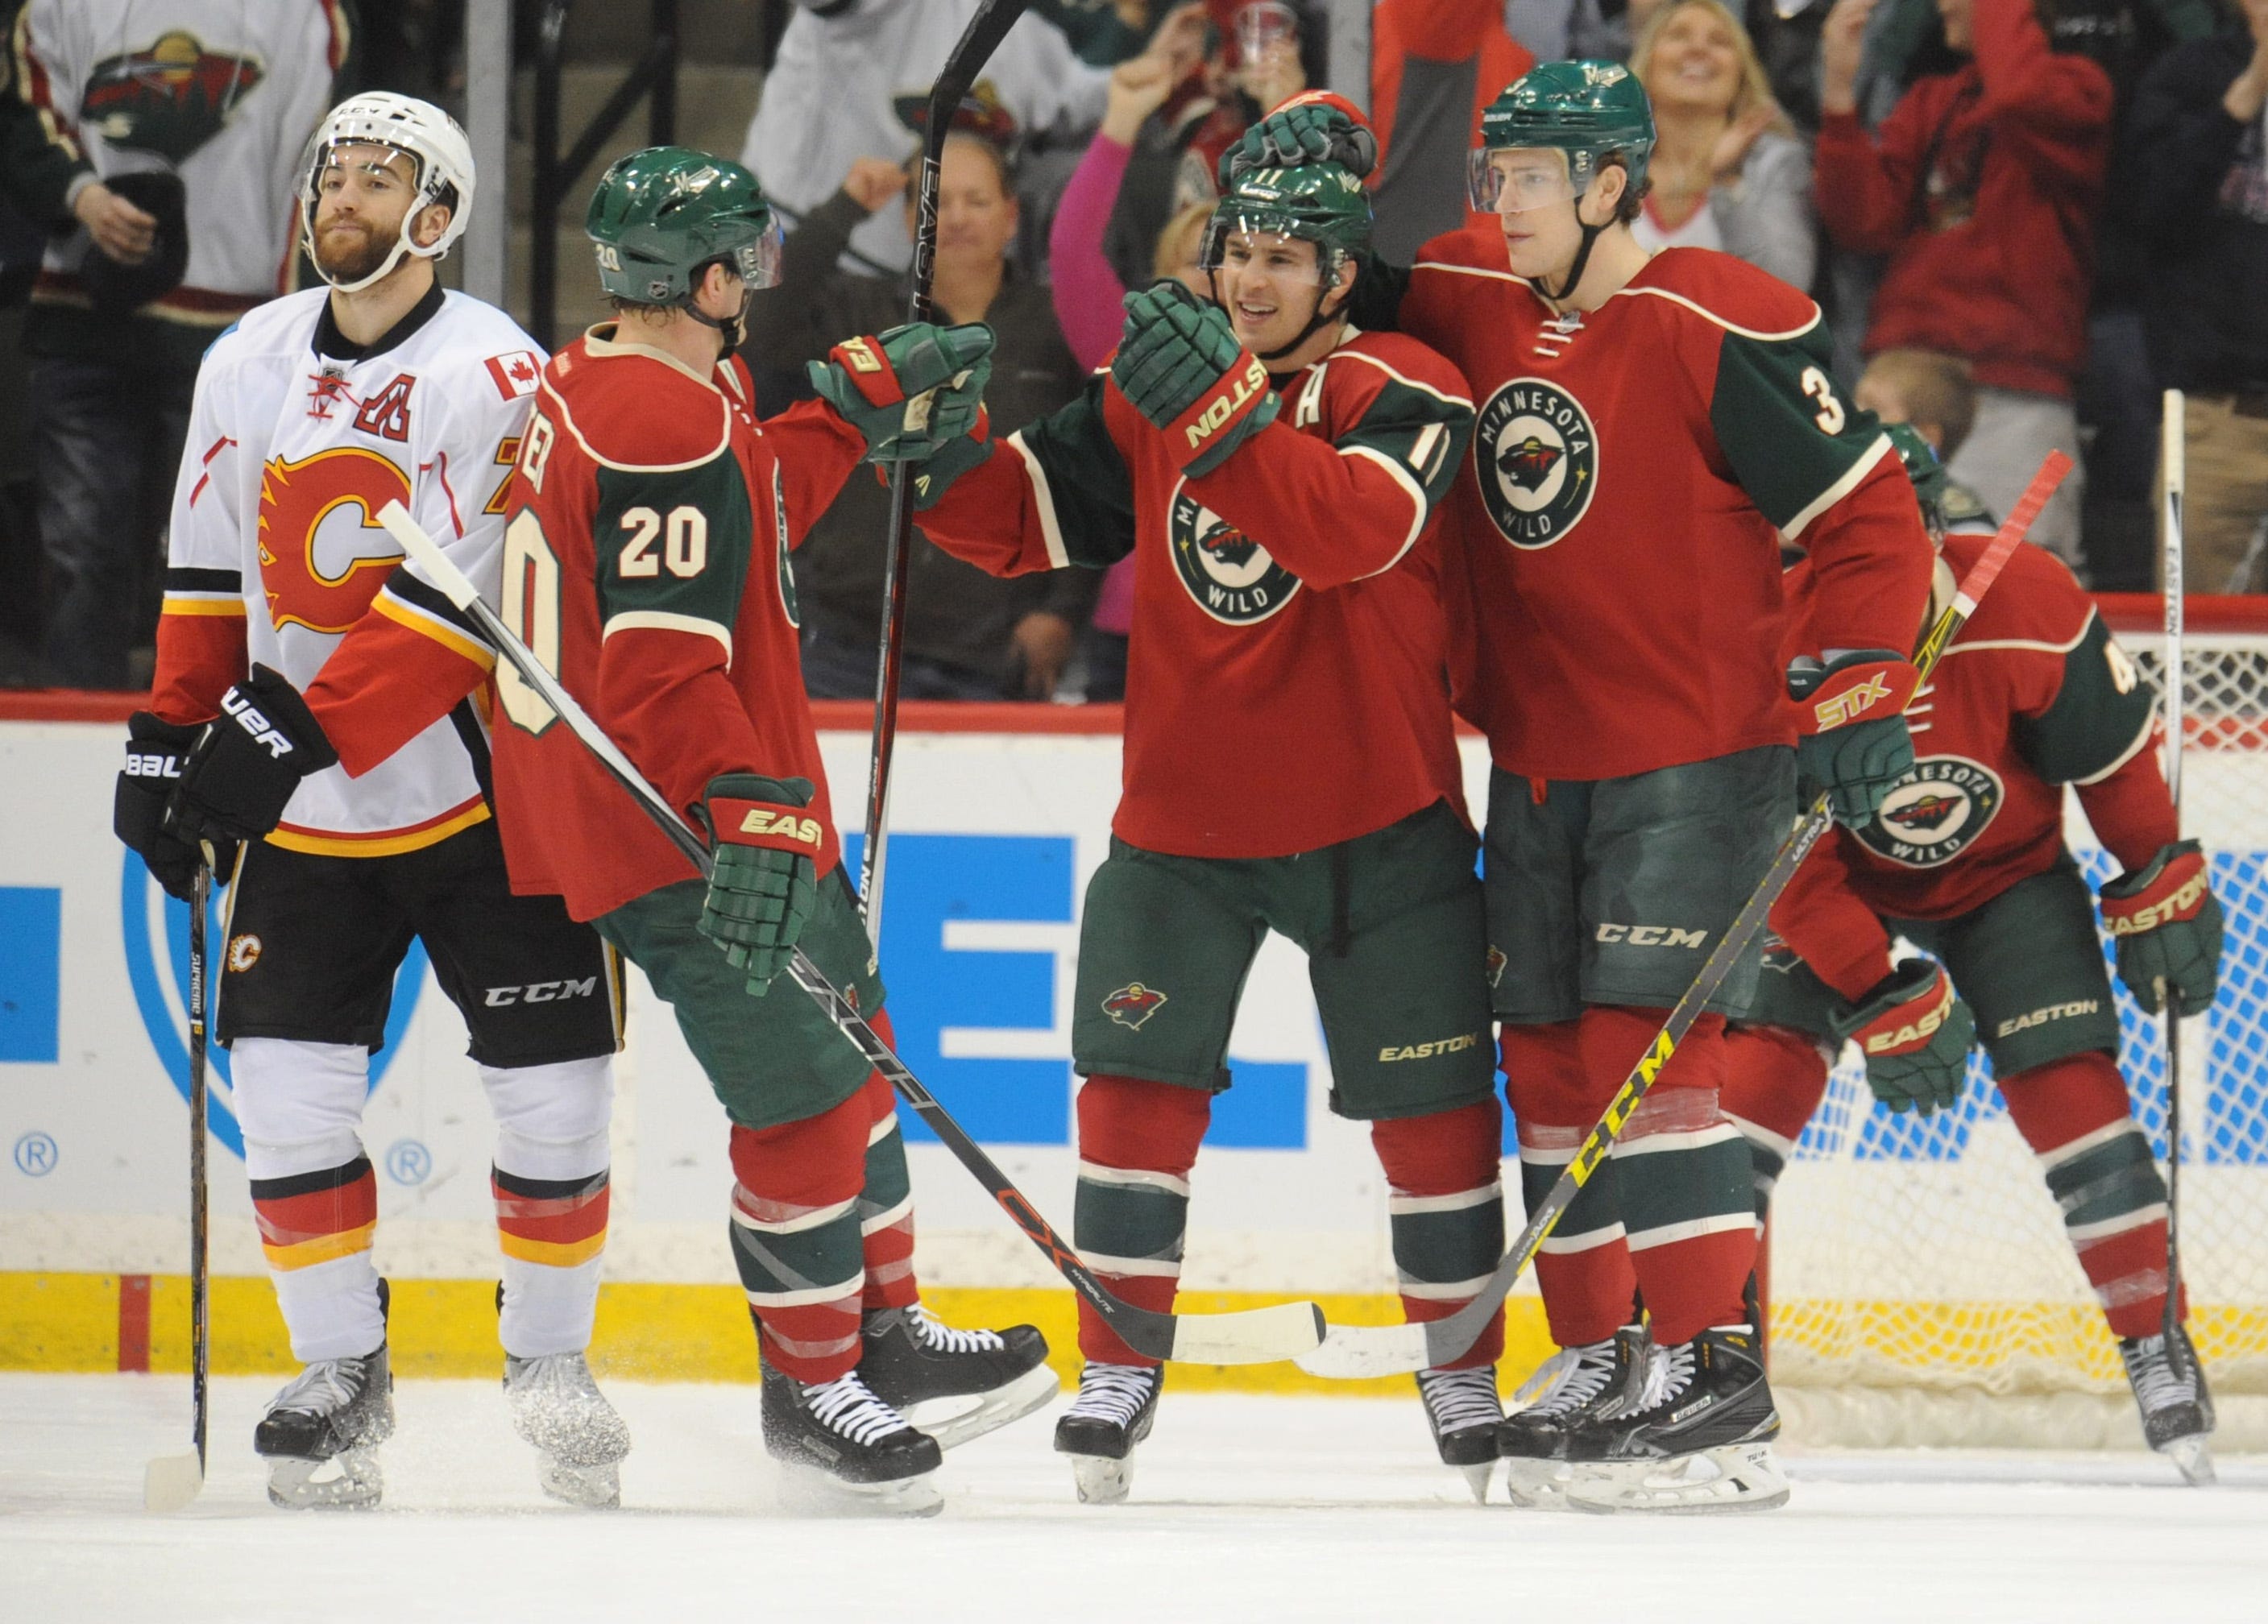 hat trick leads Wild past Flames